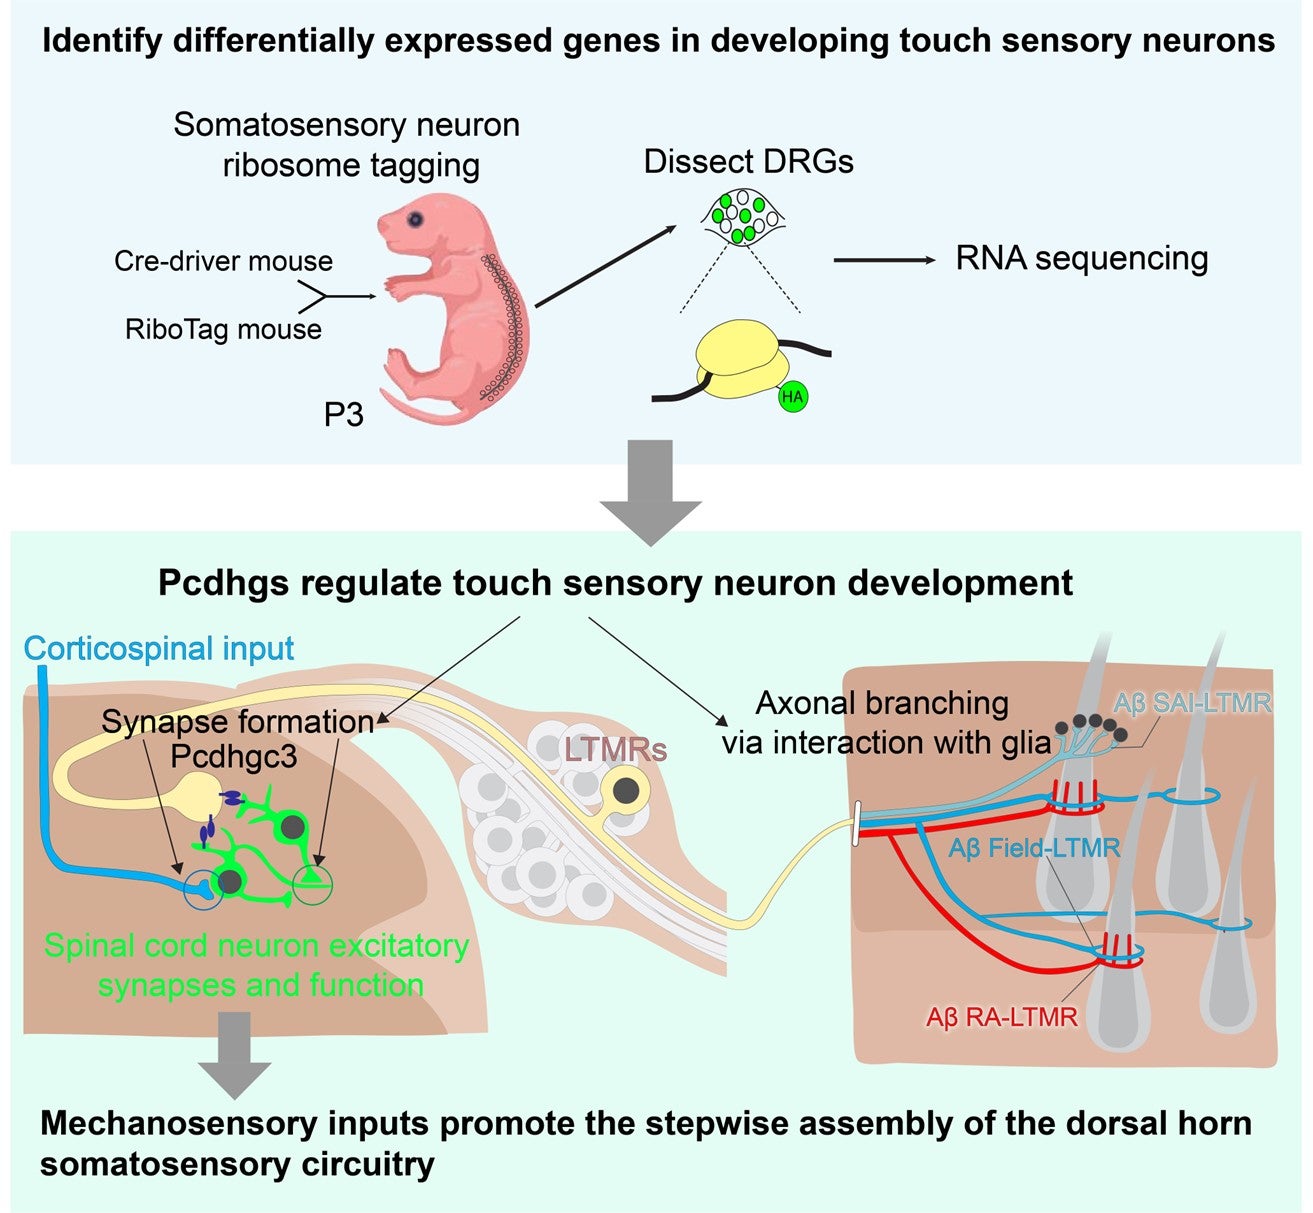 Summary of our findings, showing essential roles of clustered γ-protocadherins in promoting synapse formation and peripheral axonal branching in touch sensory neurons. 